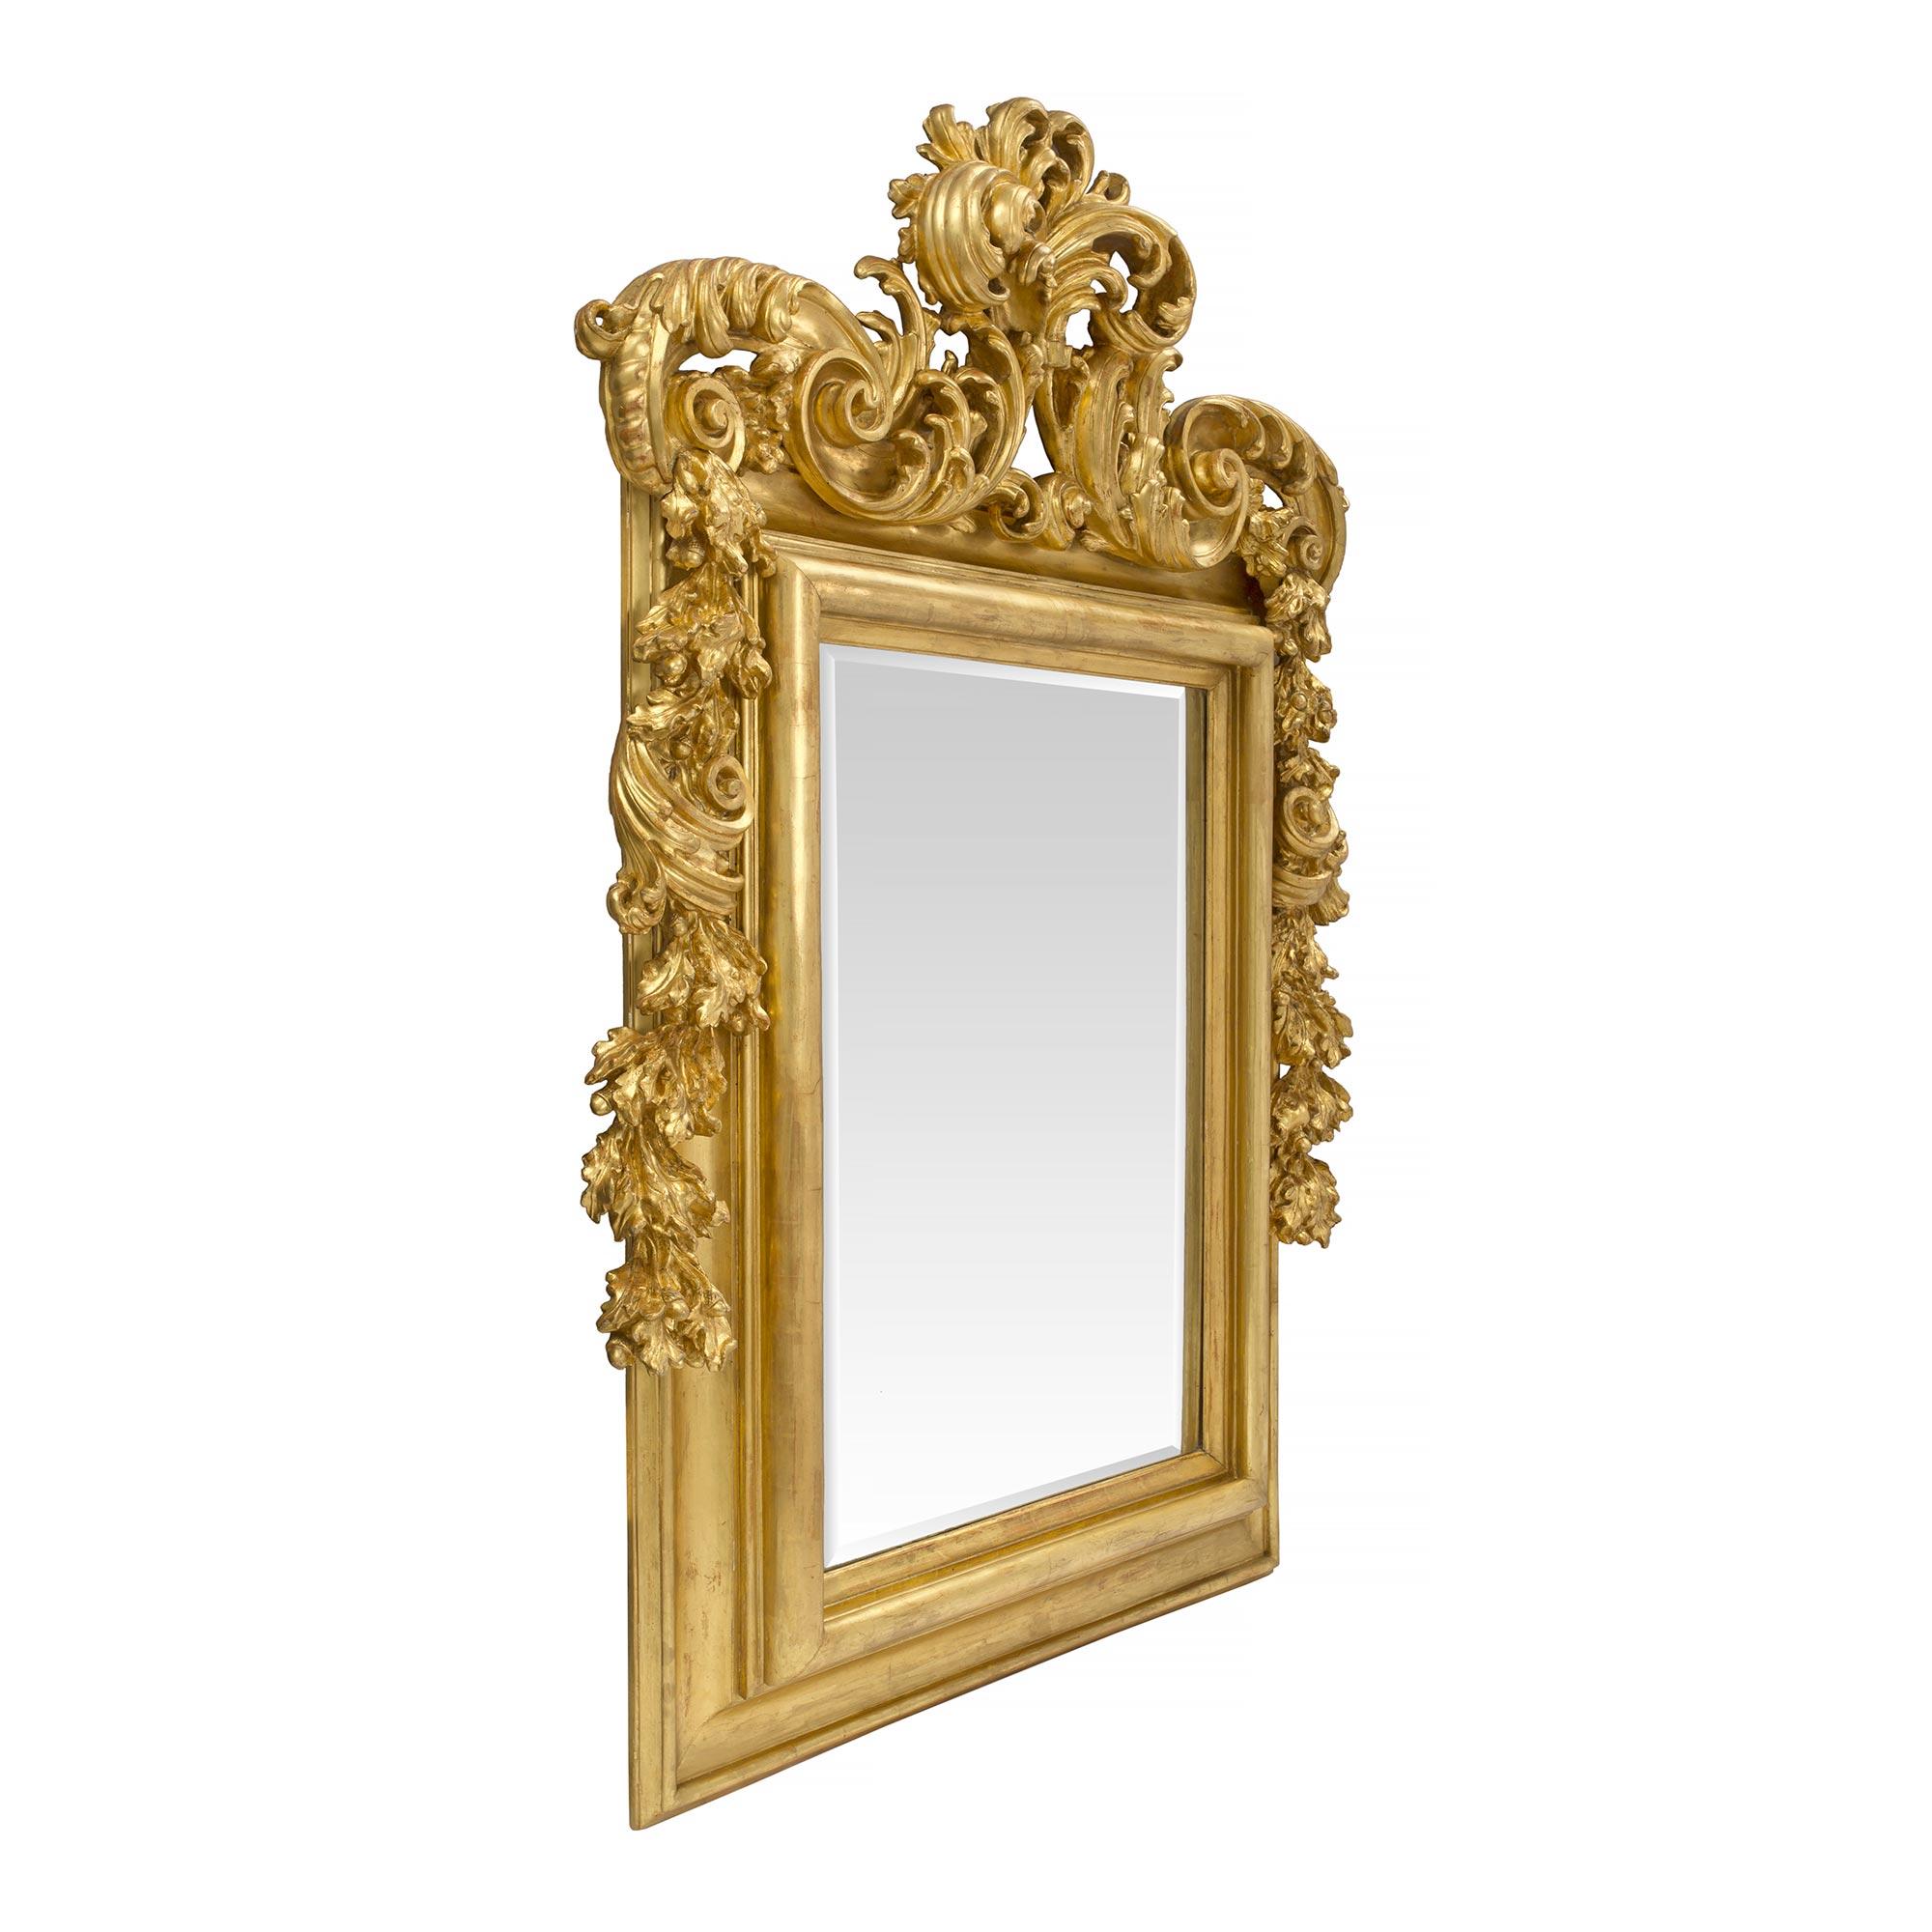 A magnificent and high quality Italian 18th century Roman rectangular giltwood mirror. The beveled mirror is within a handsome wide moulded giltwood frame. At the very impressive top crown is a robust pierced scrolled design of large opulent